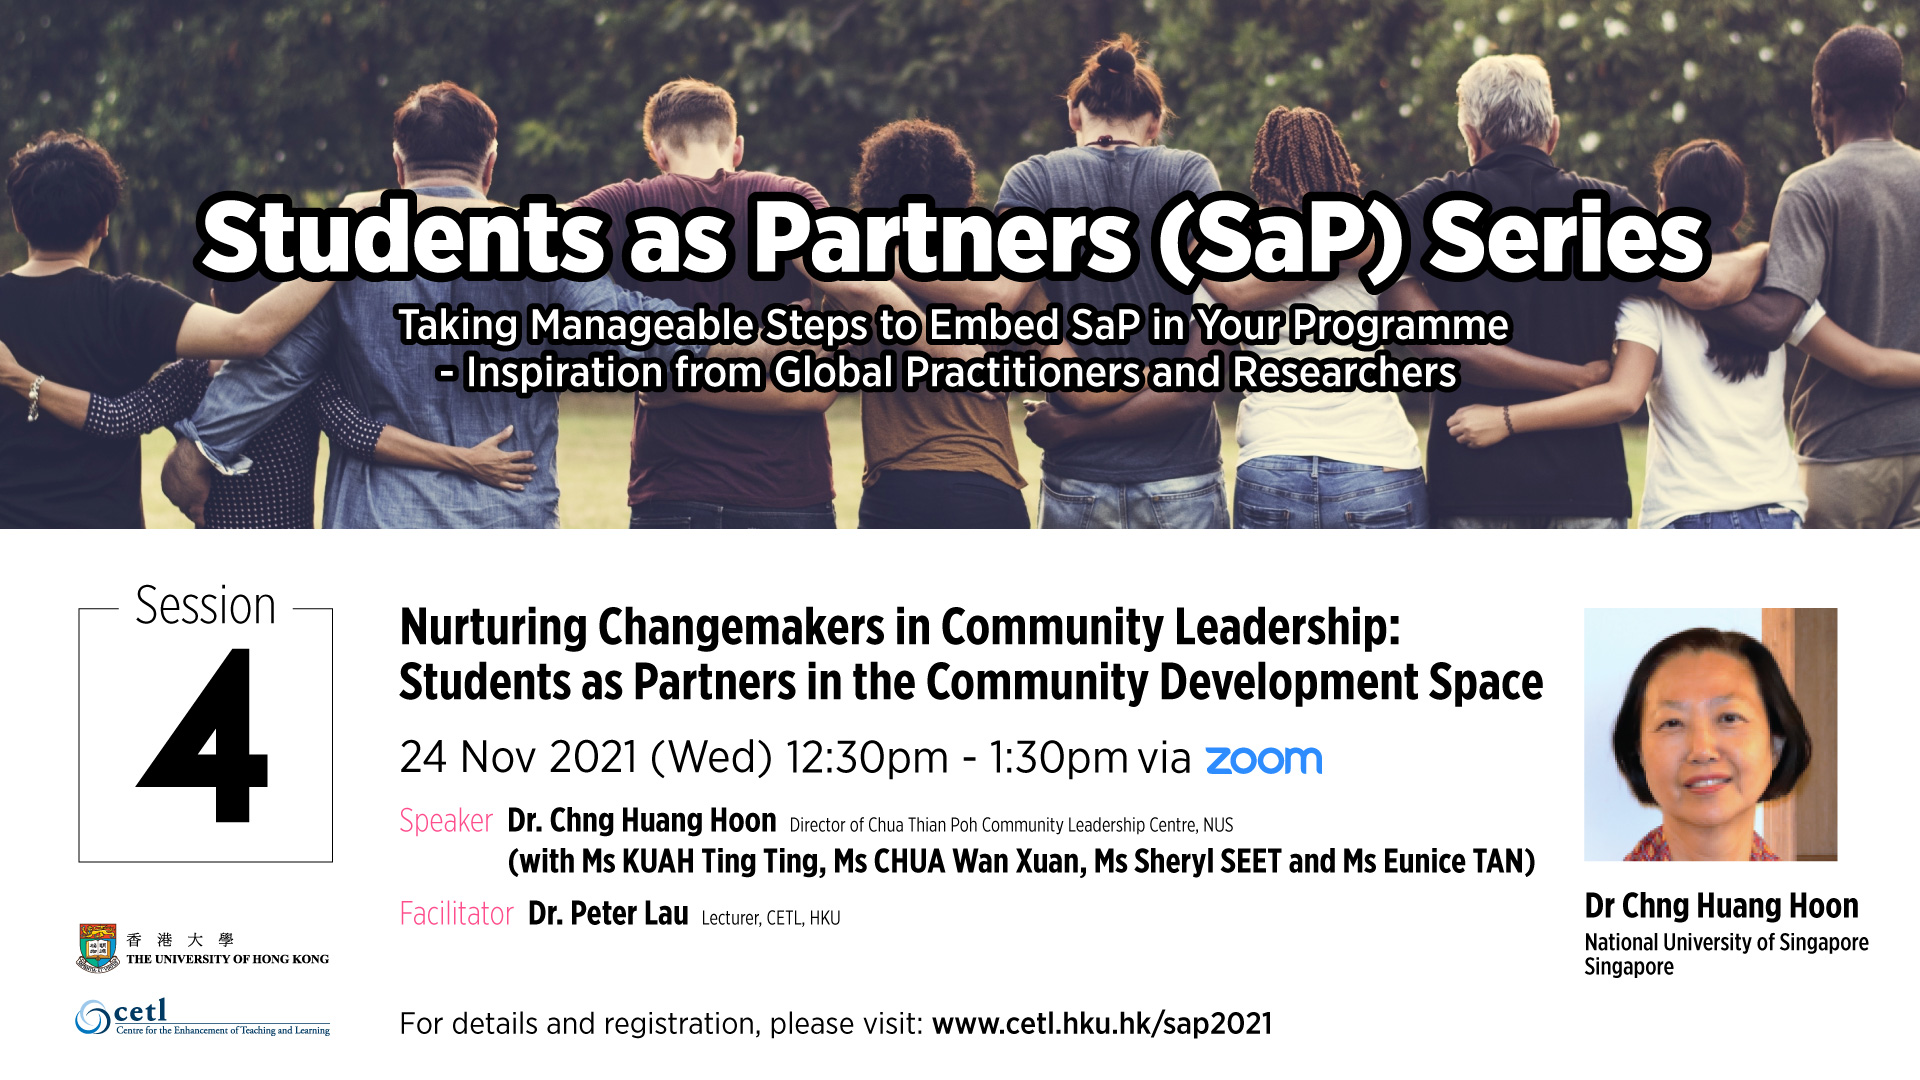 Session 4: Nurturing Changemakers in Community Leadership: Students as Partners in the Community Development Space